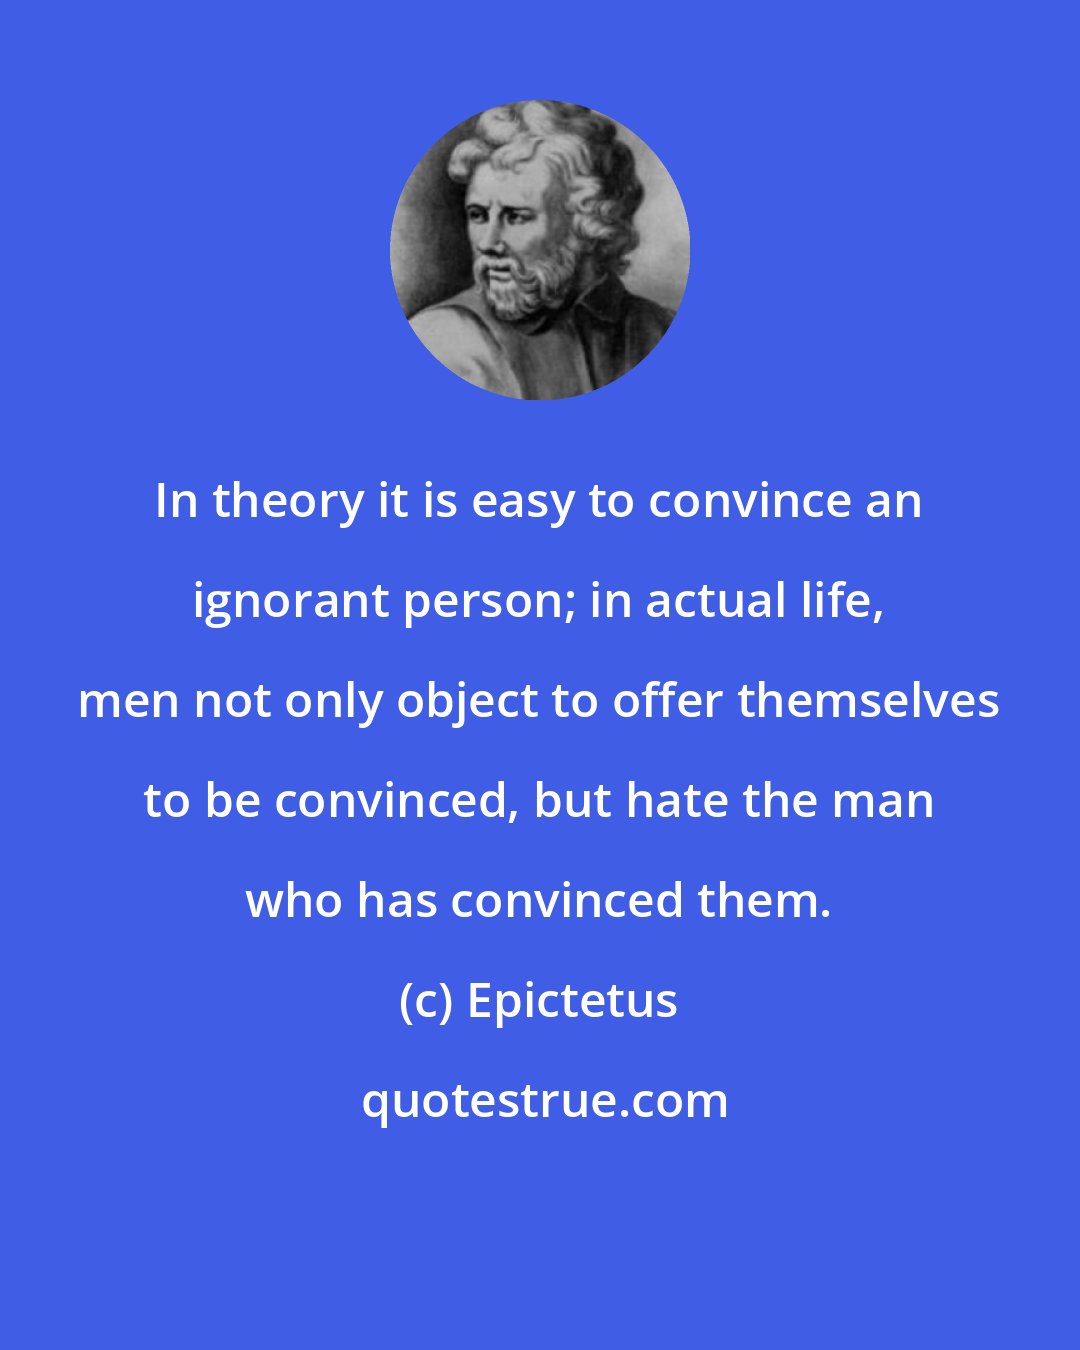 Epictetus: In theory it is easy to convince an ignorant person; in actual life, men not only object to offer themselves to be convinced, but hate the man who has convinced them.